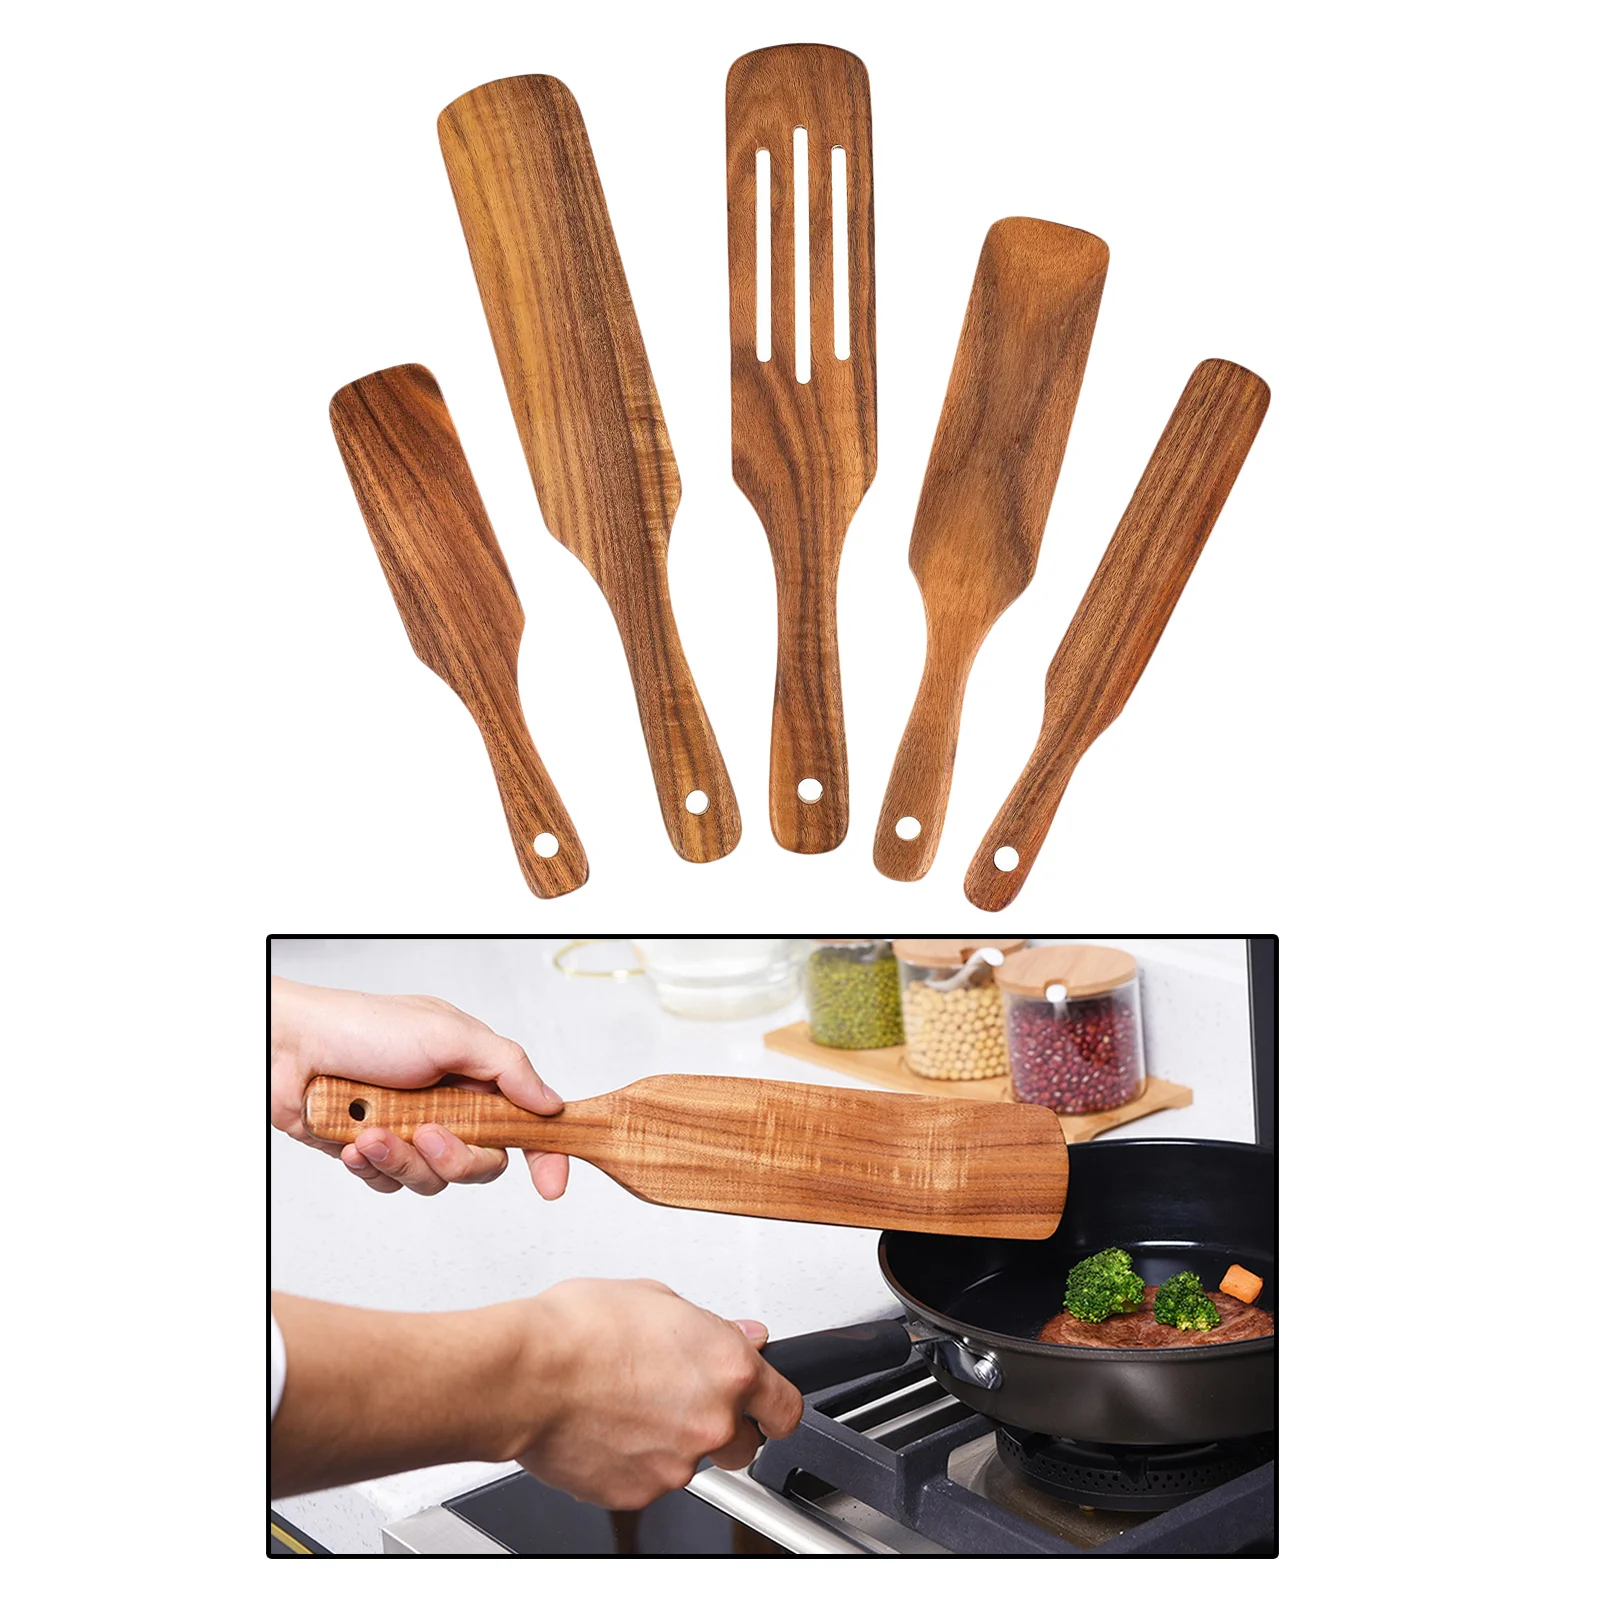 5x Slotted Heat Resistant Spatulas Spoons Set Utensils Cookware For Stirring